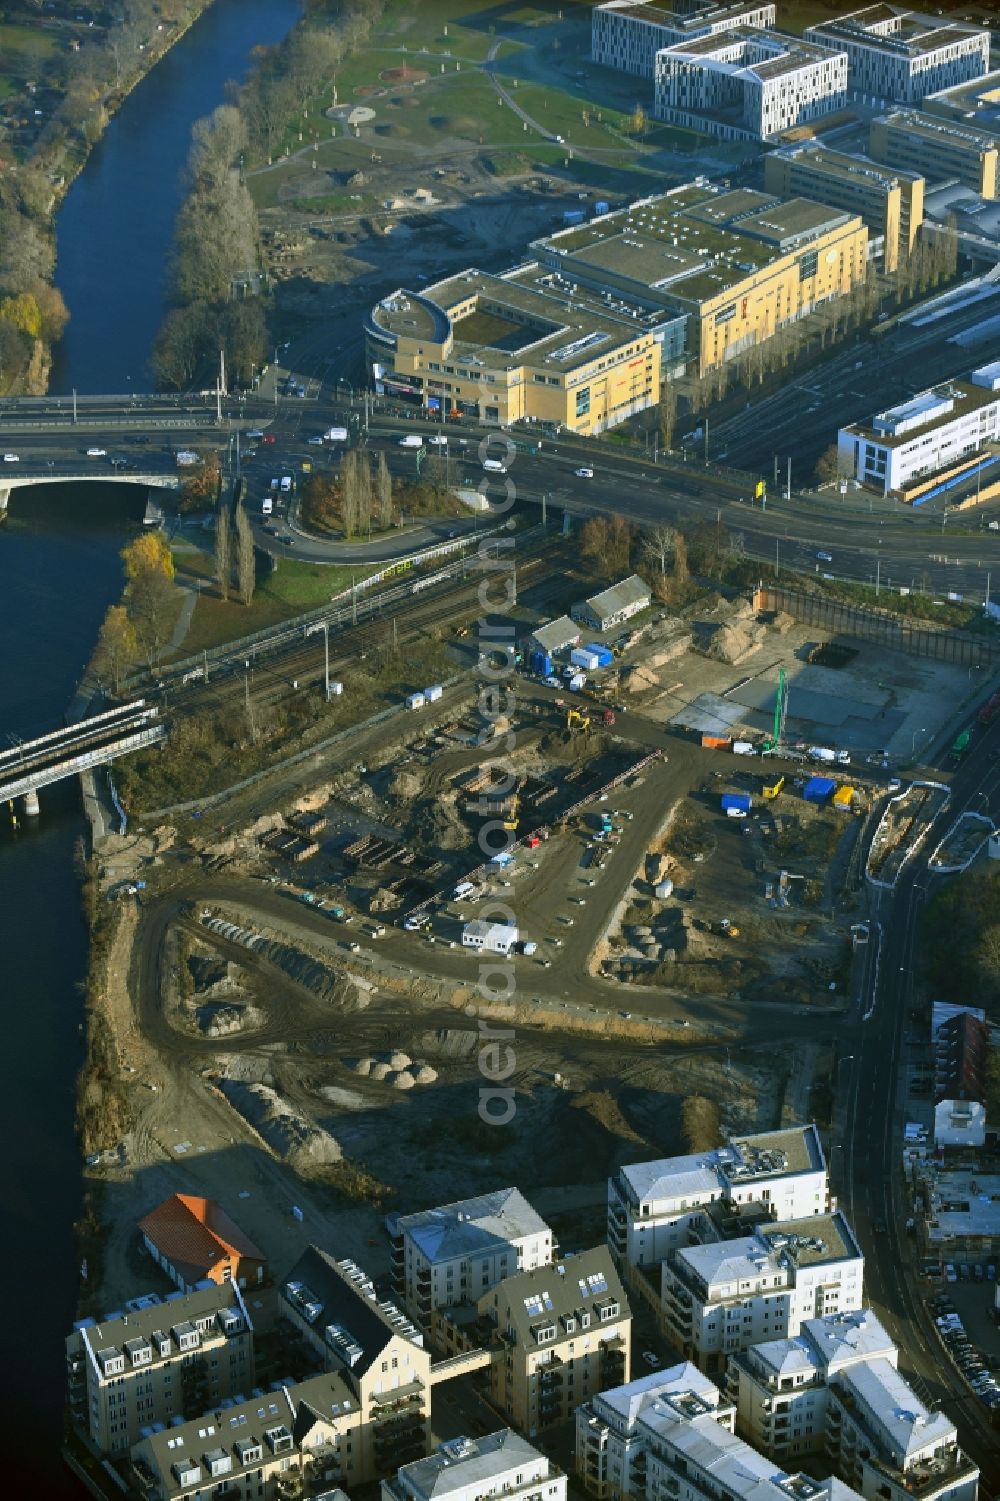 Aerial photograph Potsdam - Construction site with development works and embankments works on river banks of Havel in the district Suedliche Innenstadt in Potsdam in the state Brandenburg, Germany